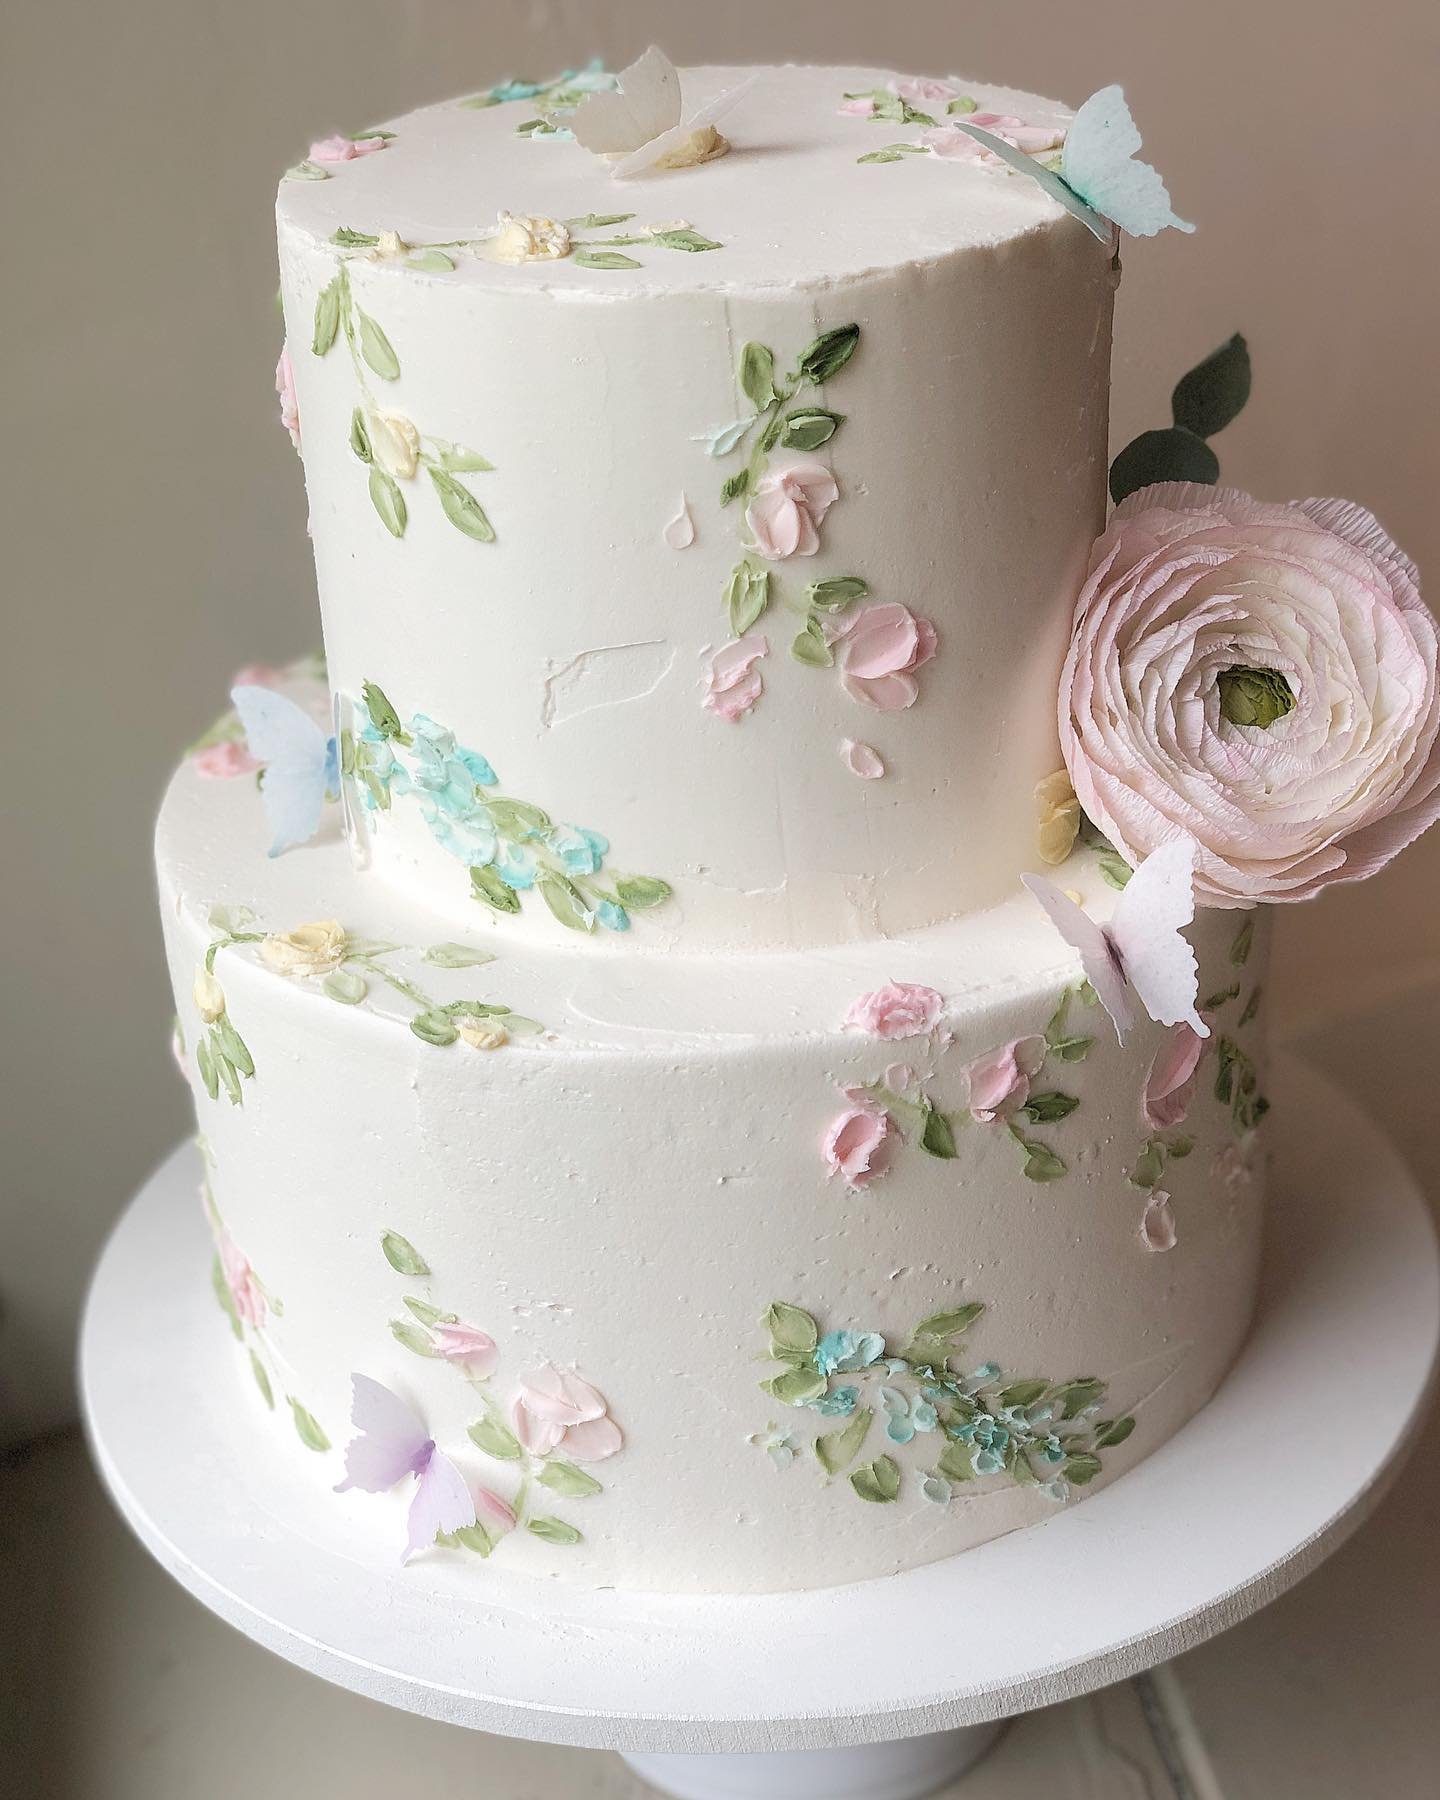 Another pretty Spring floral cake with addition of a edible wafer paper flower, delivered to The Mill at Manor Falls. #lancasterpaweddings #bellamanse